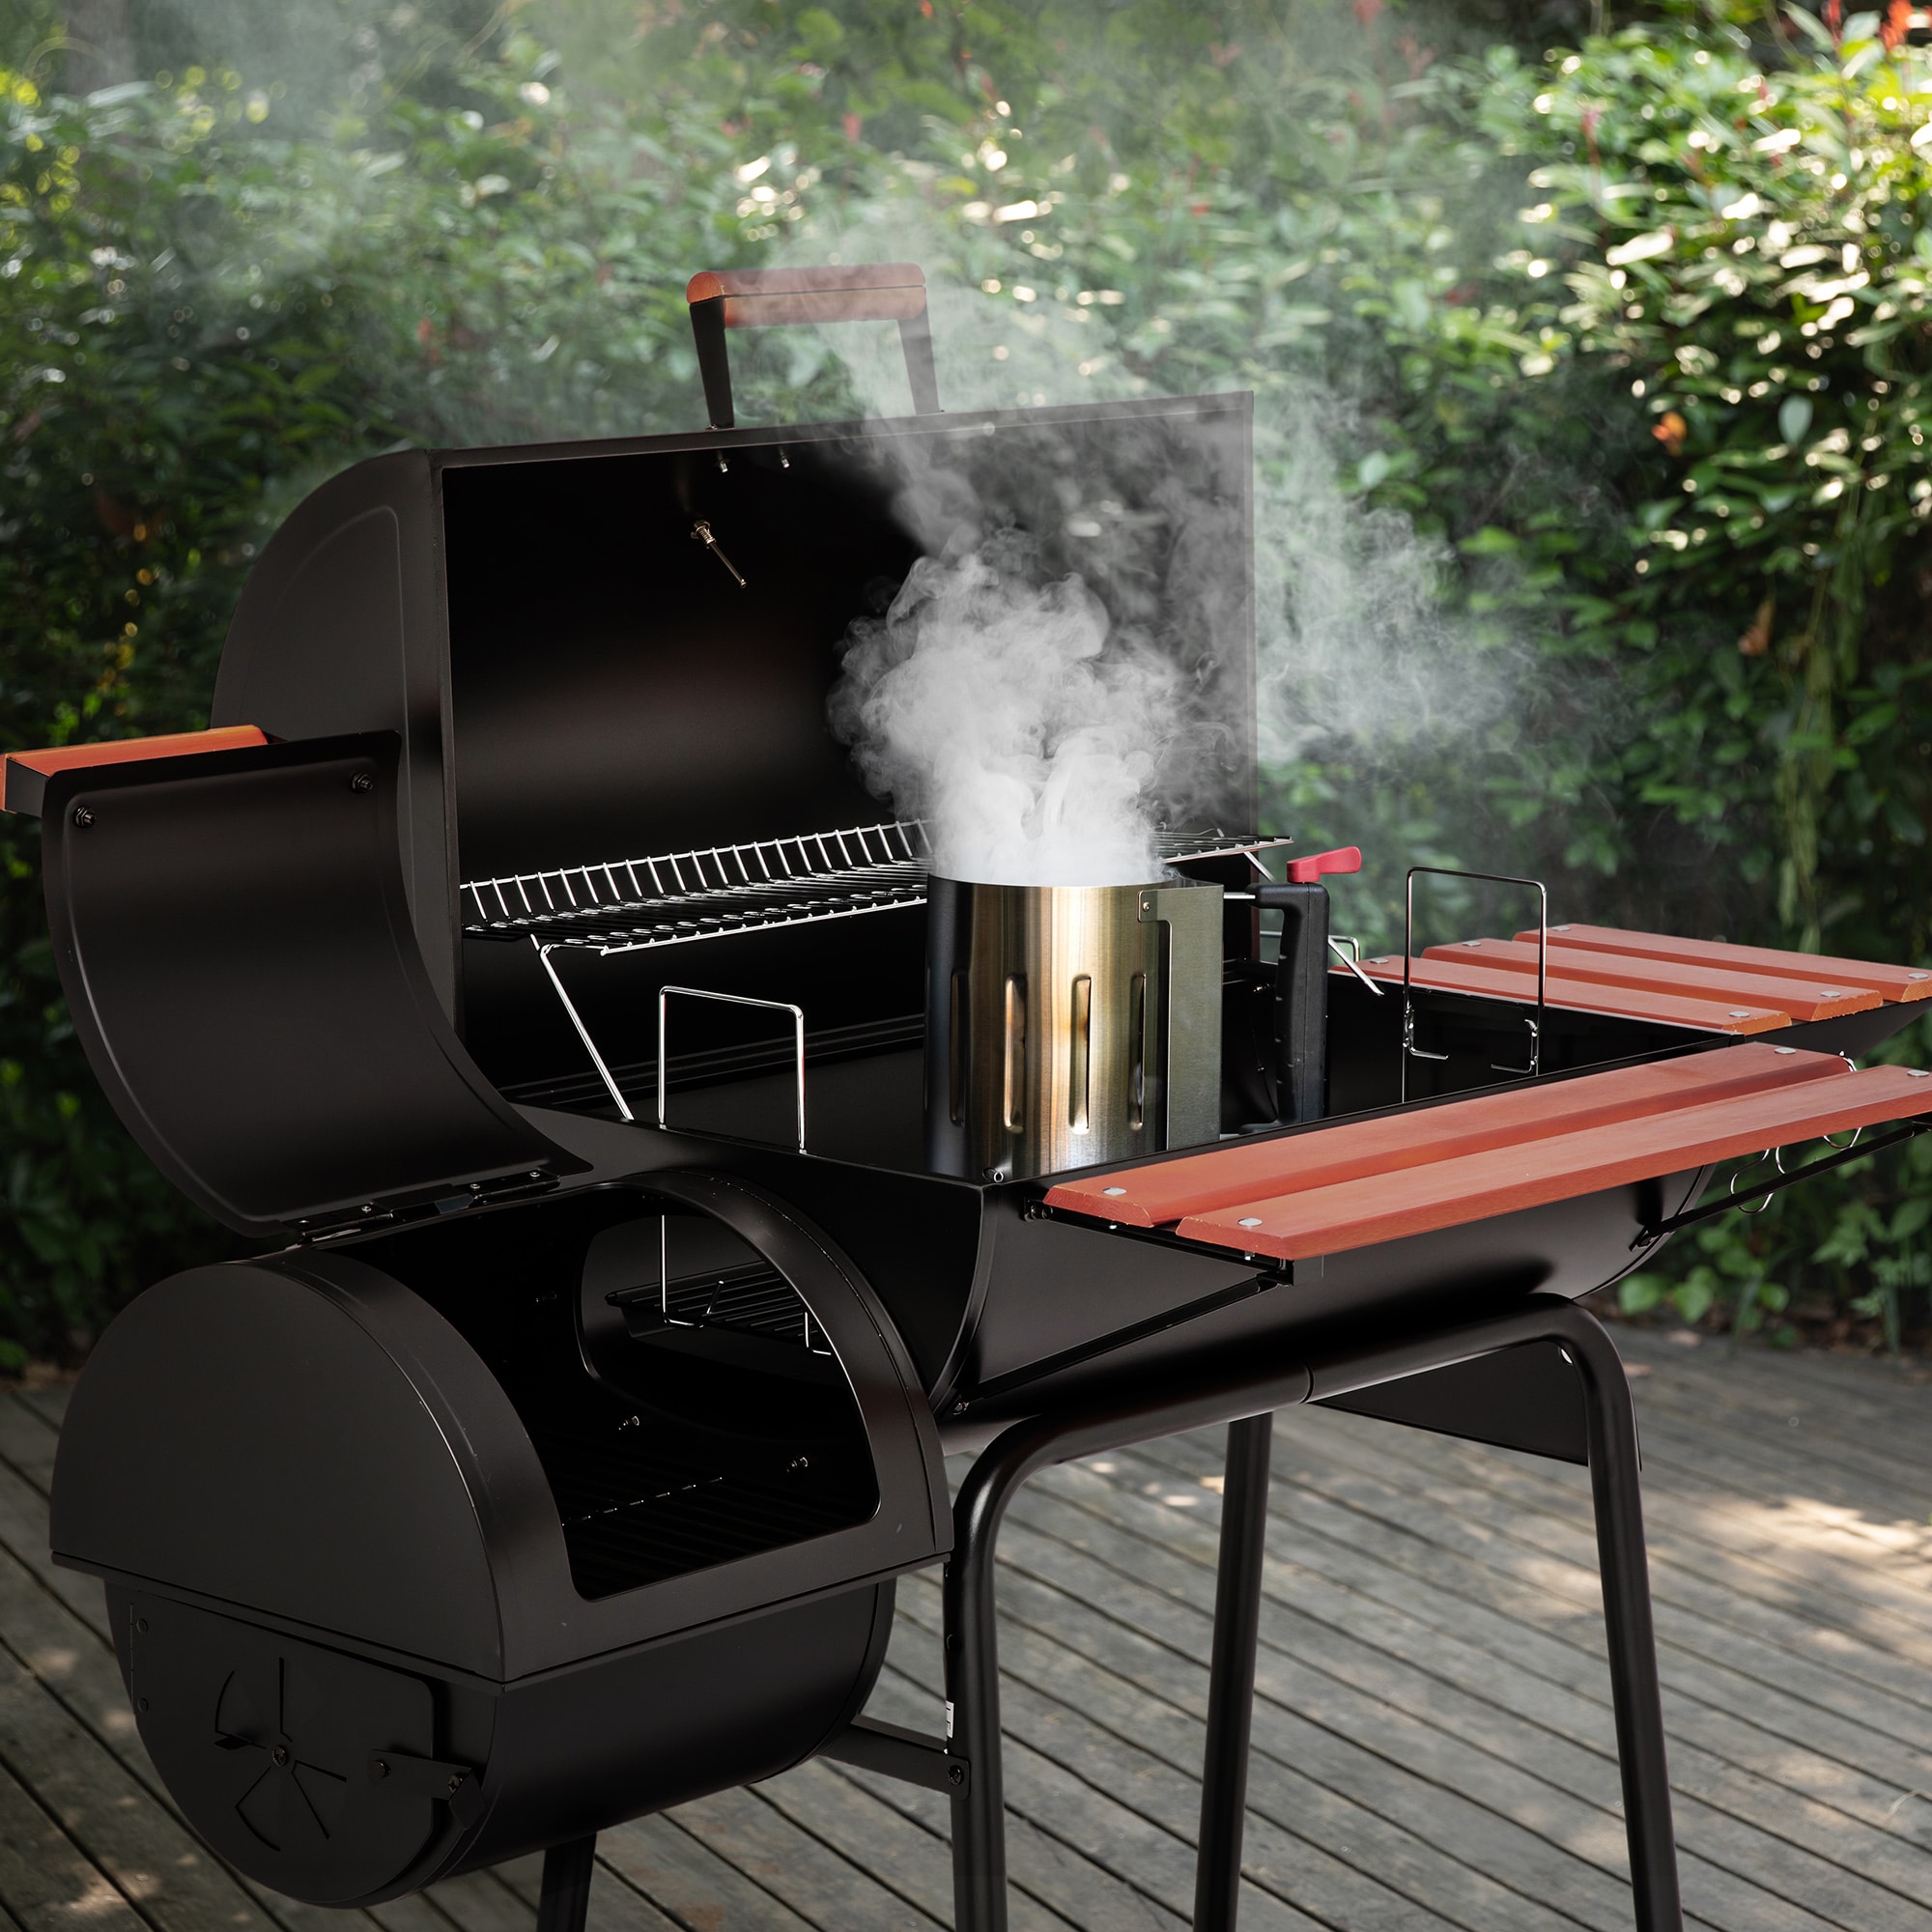 30 in. Smoker Black Barrel Charcoal Grill with Offset Smoker with Cover For  Outdoor, Backyard Cooking